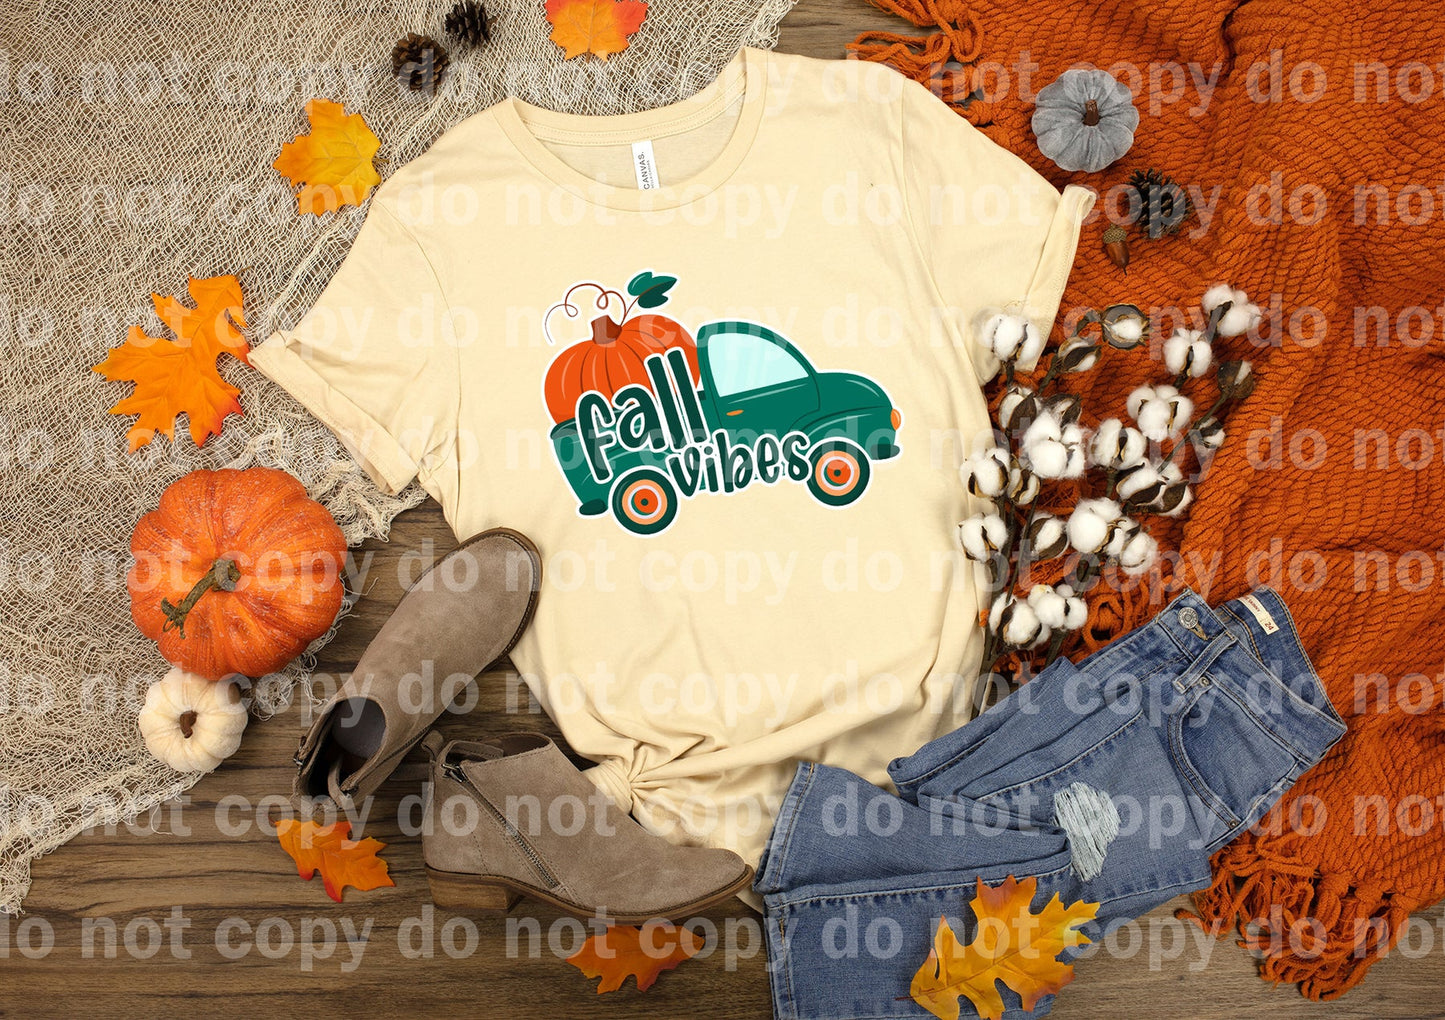 Fall Vibes Dream Print or Sublimation Print